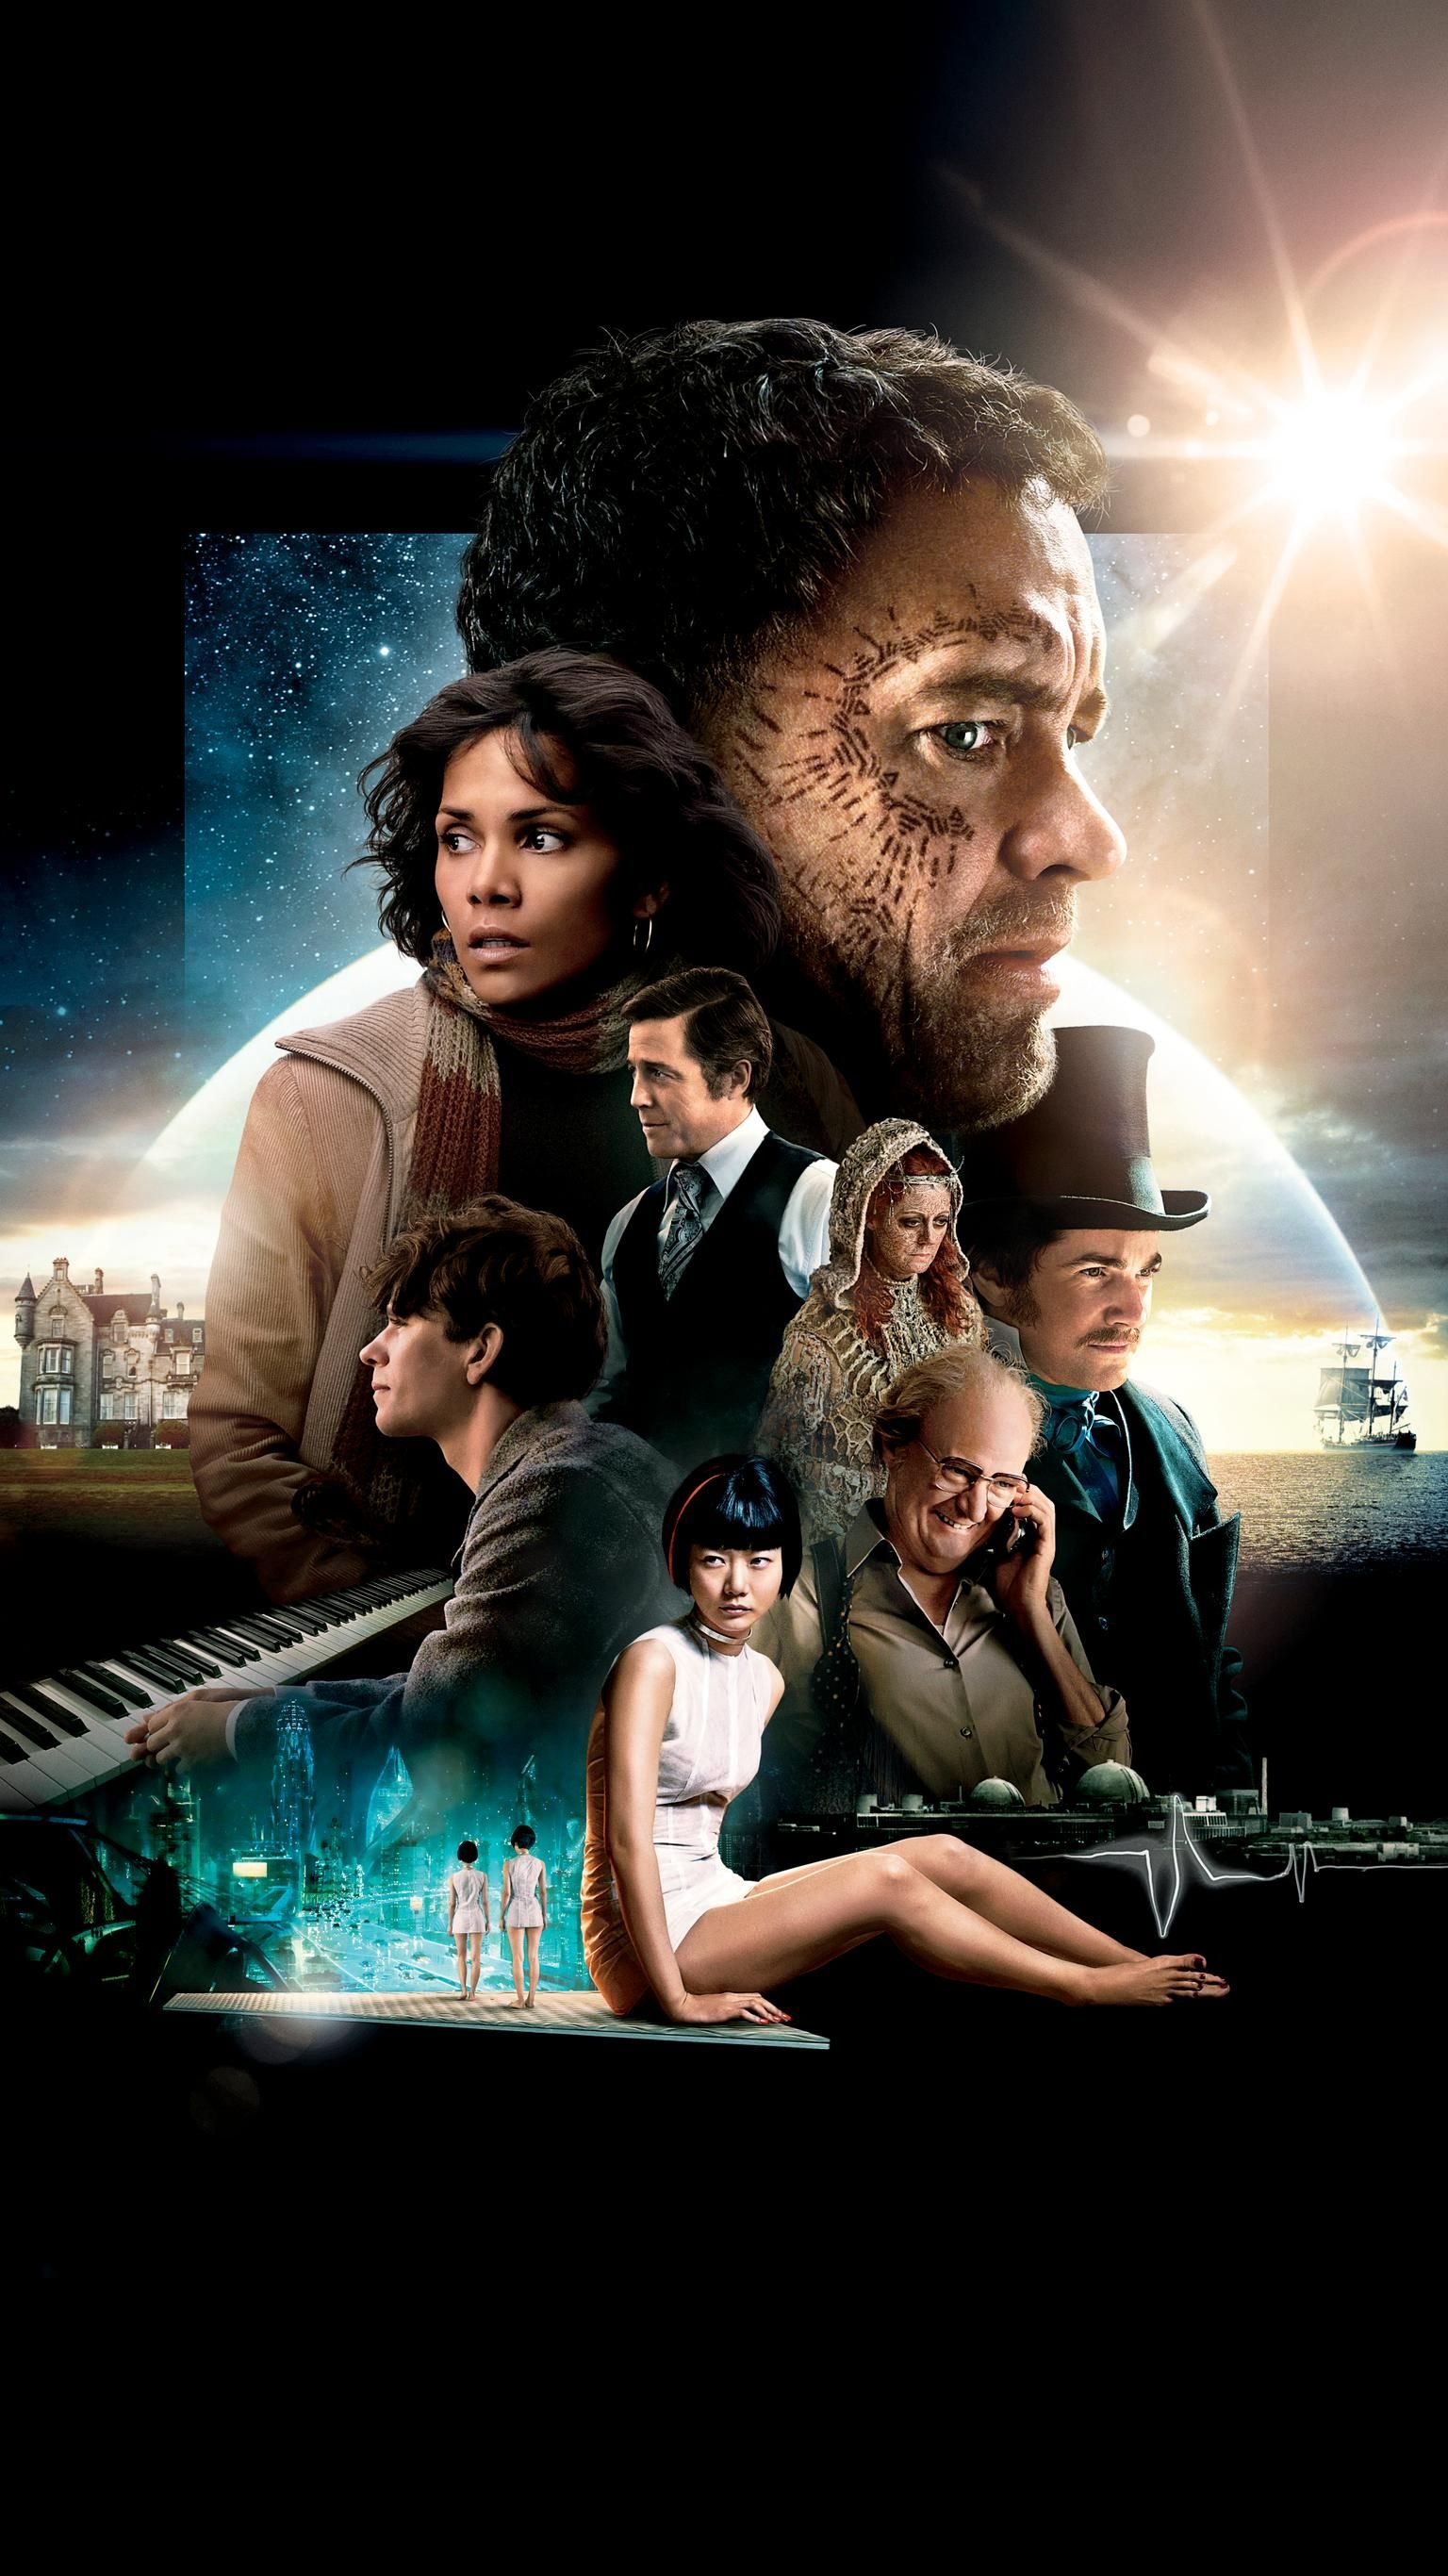 Cloud Atlas: The film was produced with a budget between US$100 million and US$146.7 million. 1540x2740 HD Background.